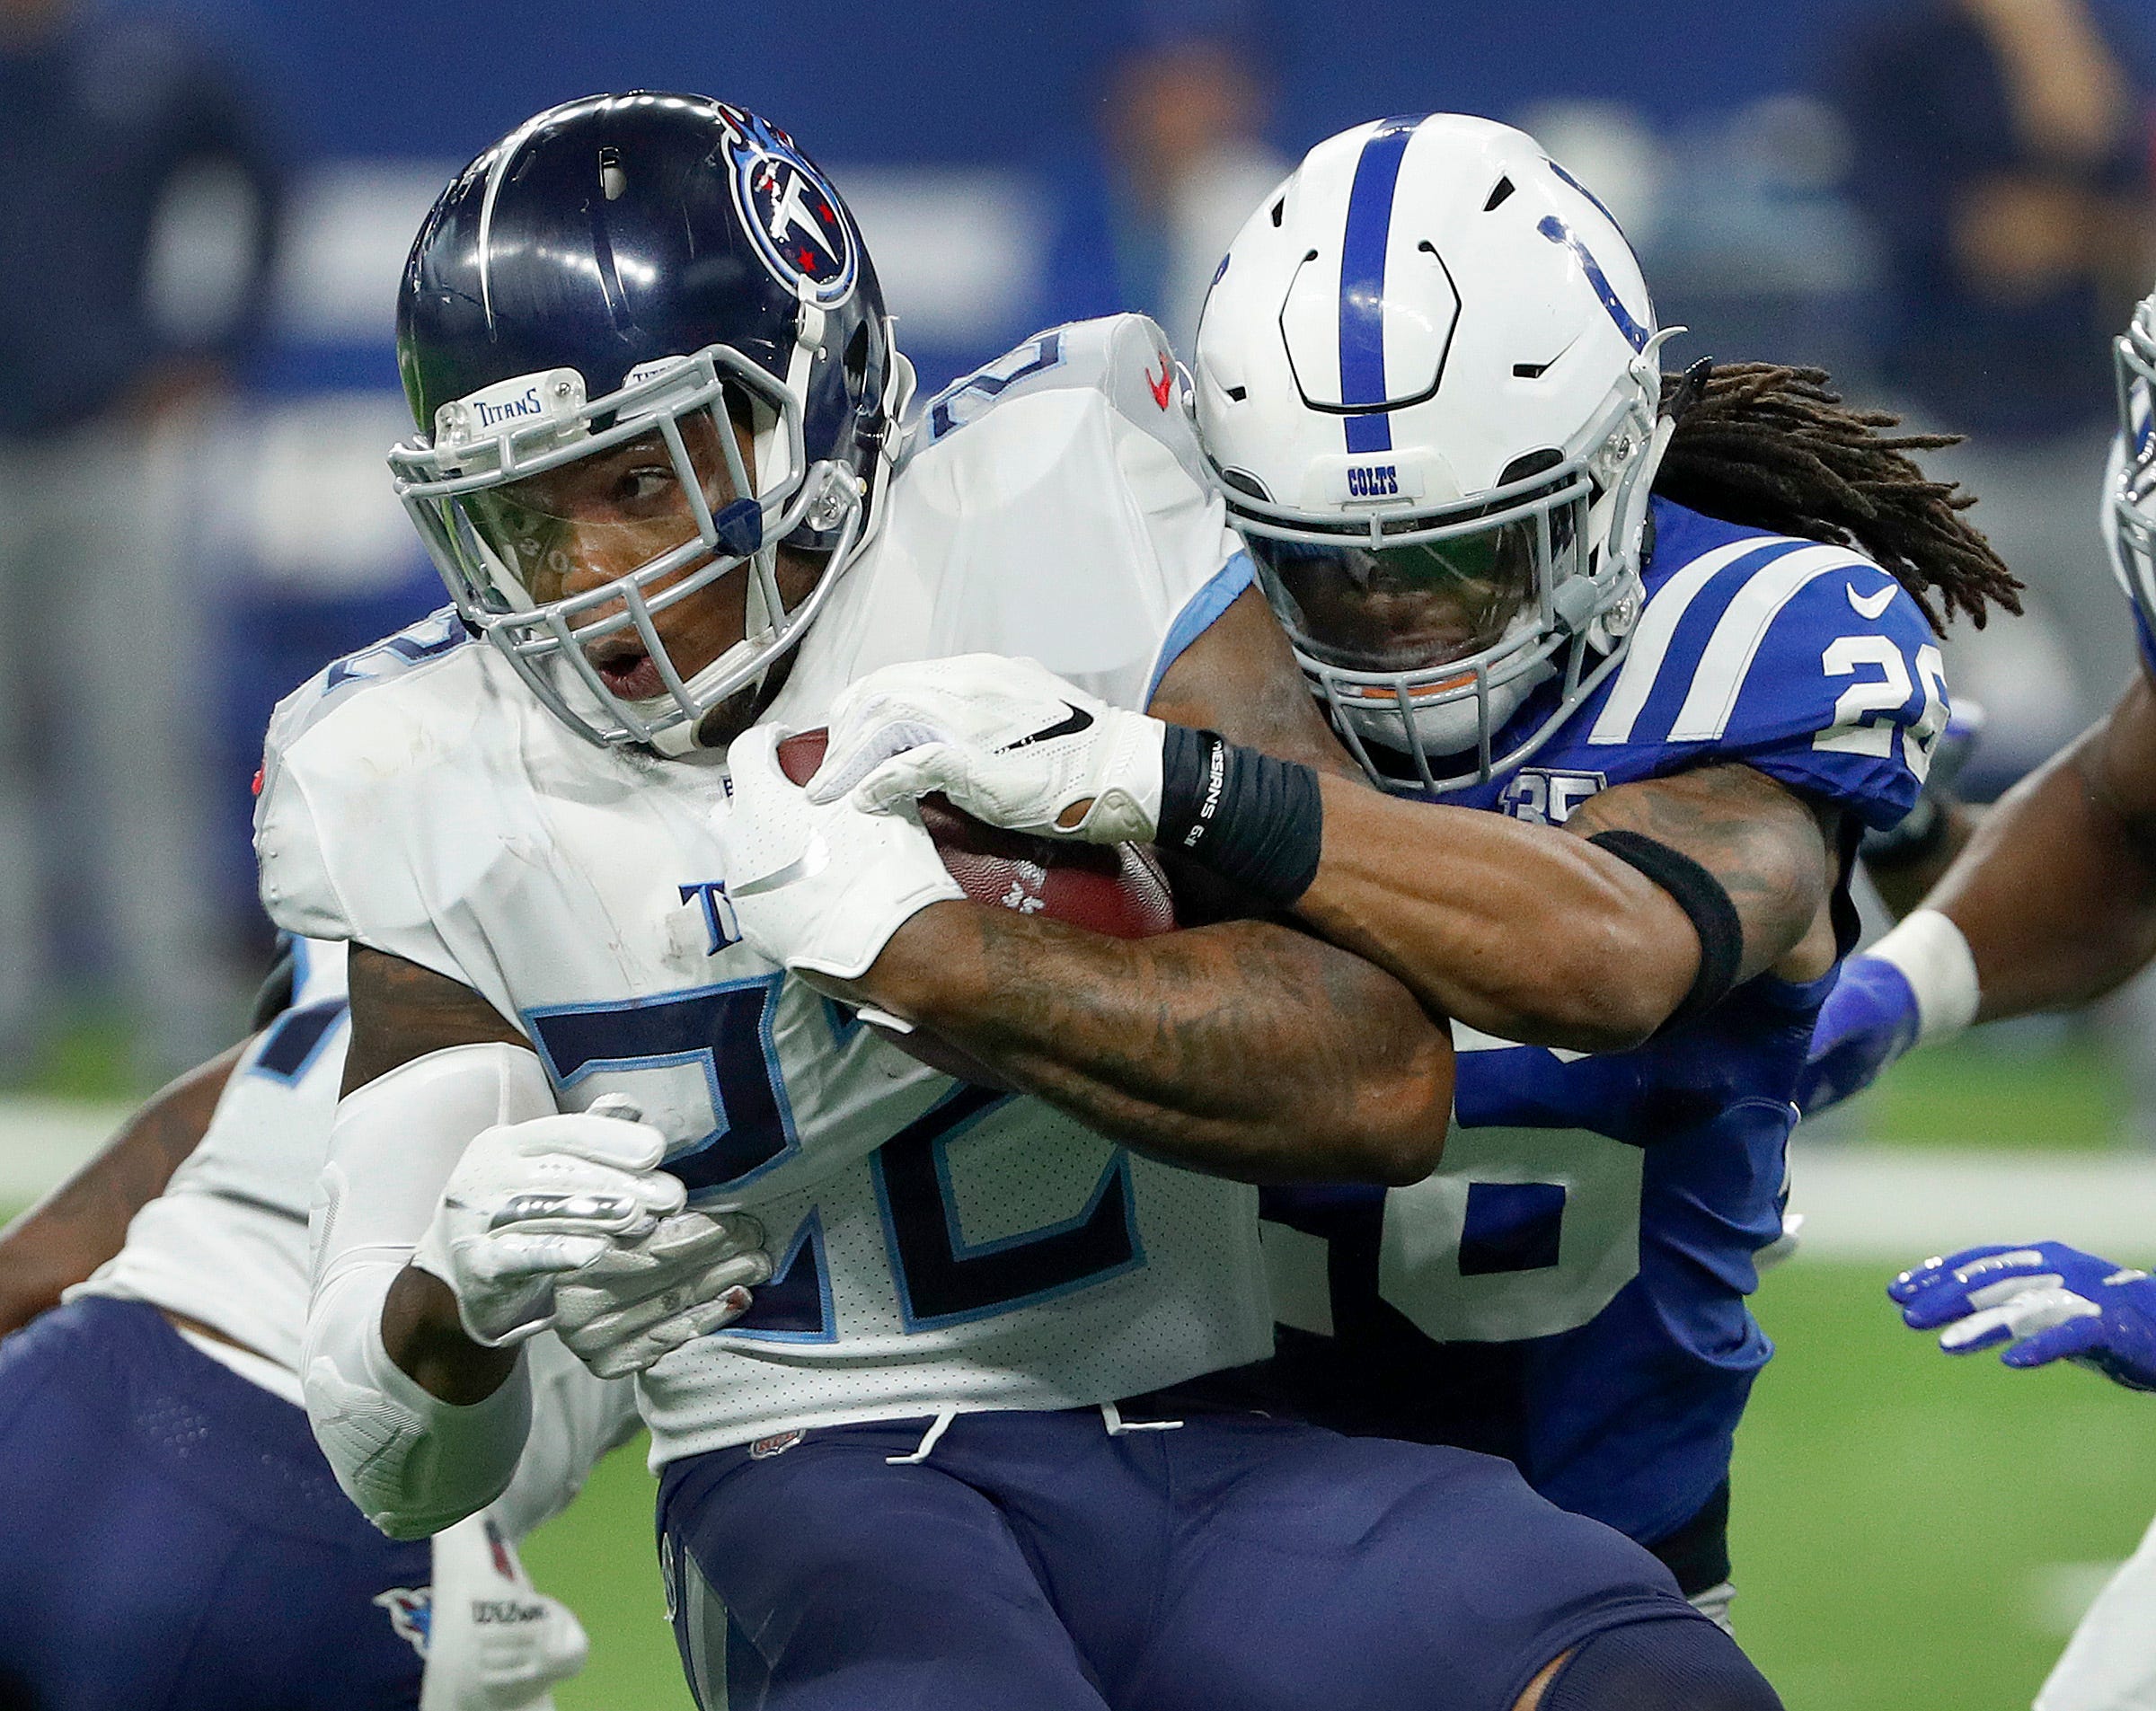 Colts safety Clayton Geathers taking it slow now so he can be ready when it counts